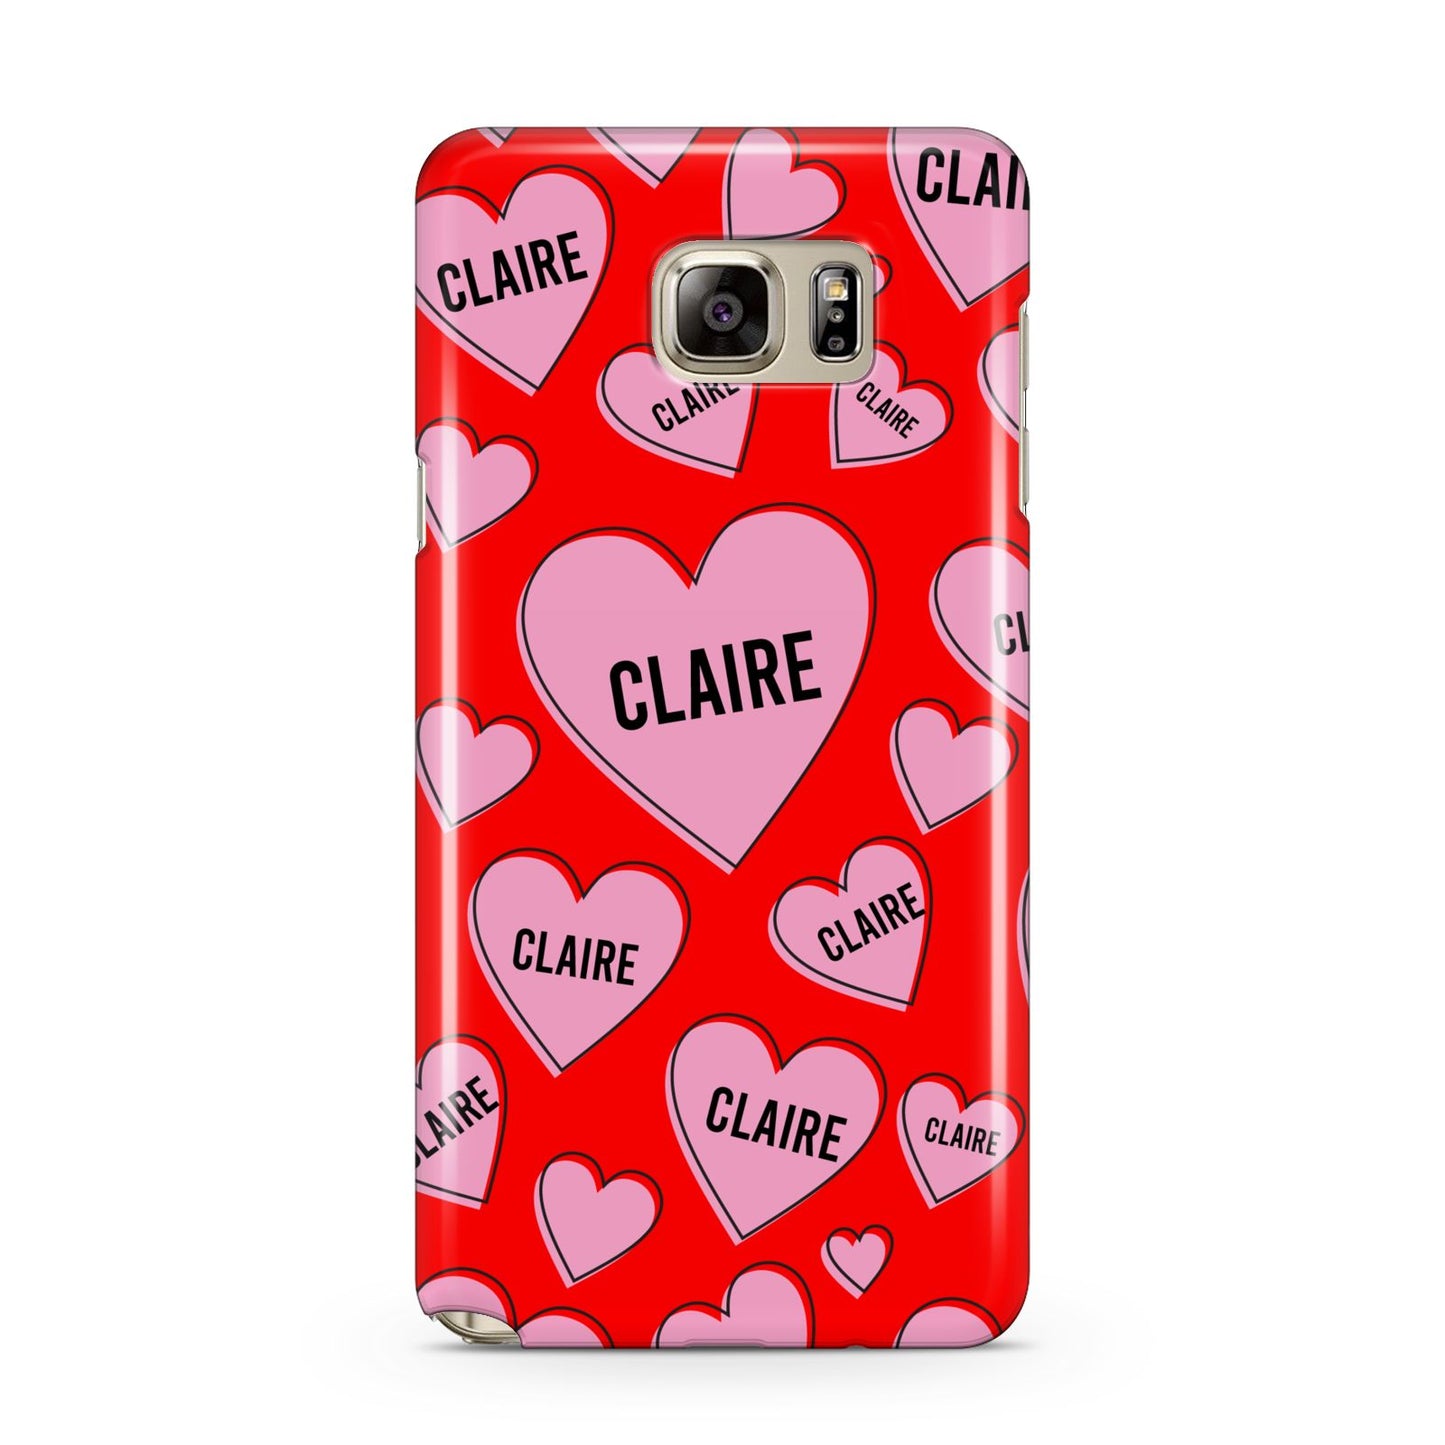 Personalised Hearts Samsung Galaxy Note 5 Case